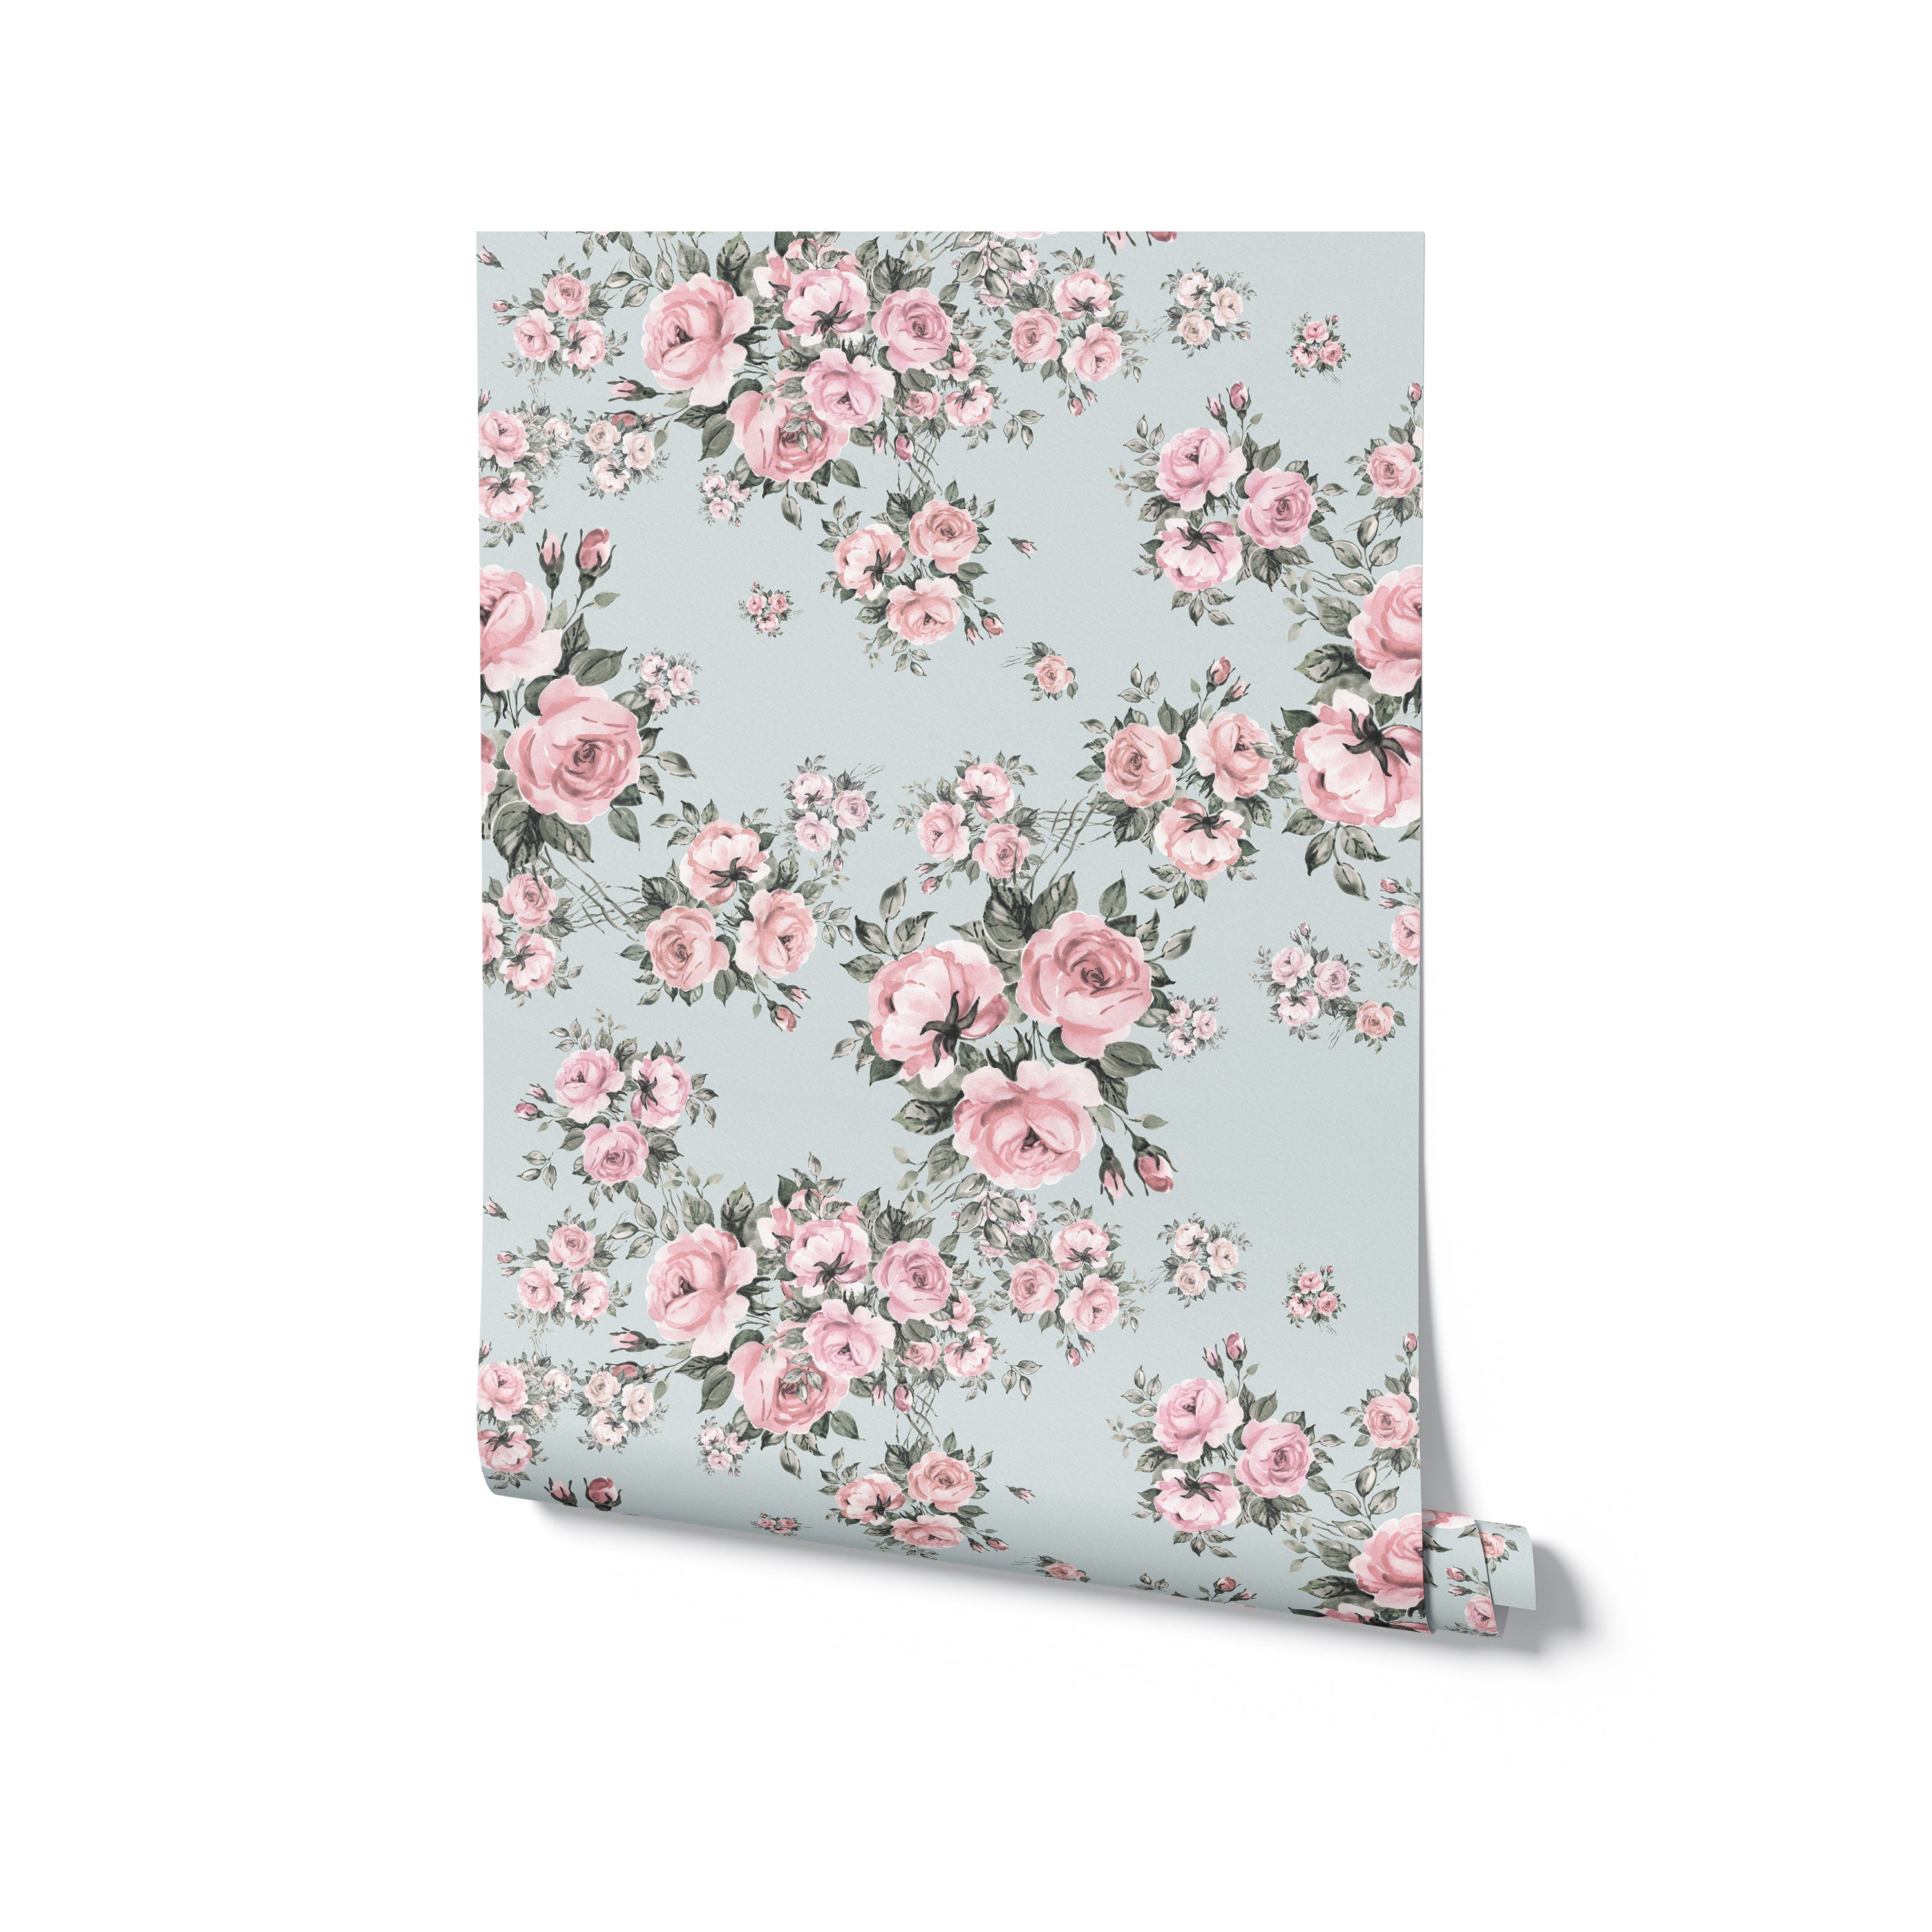 A roll of Rose Bouquet Wallpaper II displaying its beautiful pattern of pink roses and green leaves on a light blue background, ready to enhance any room with its floral elegance.